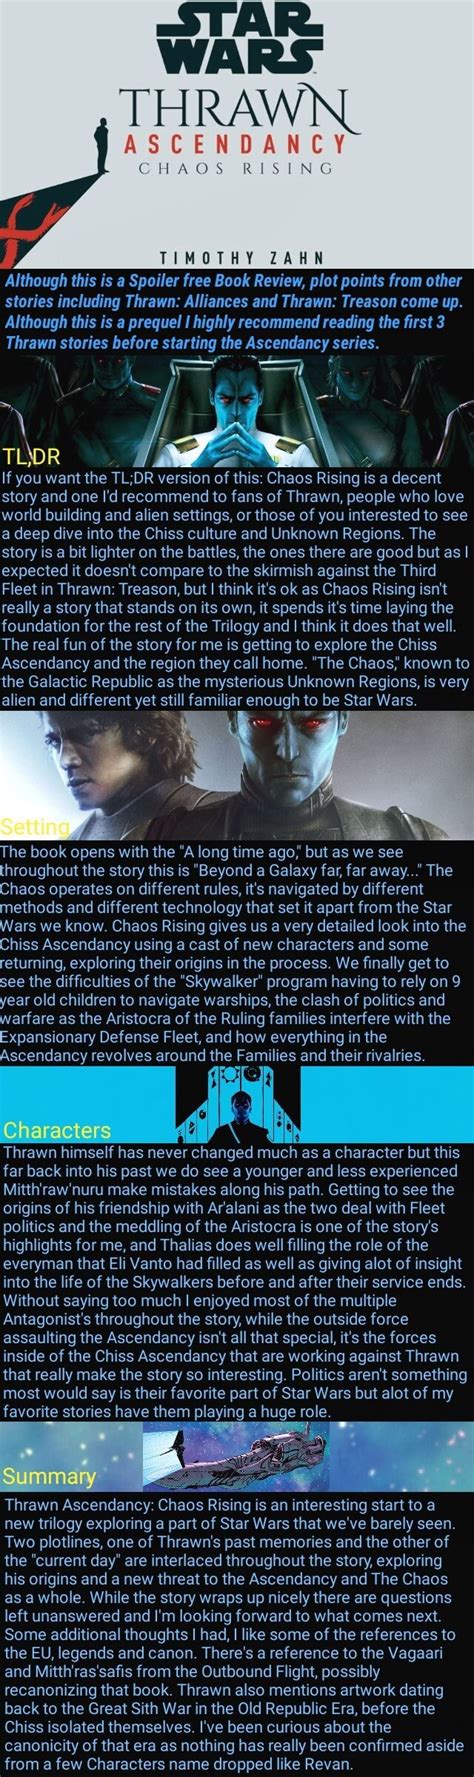 haos timothy zahn although this is a spoiler free book